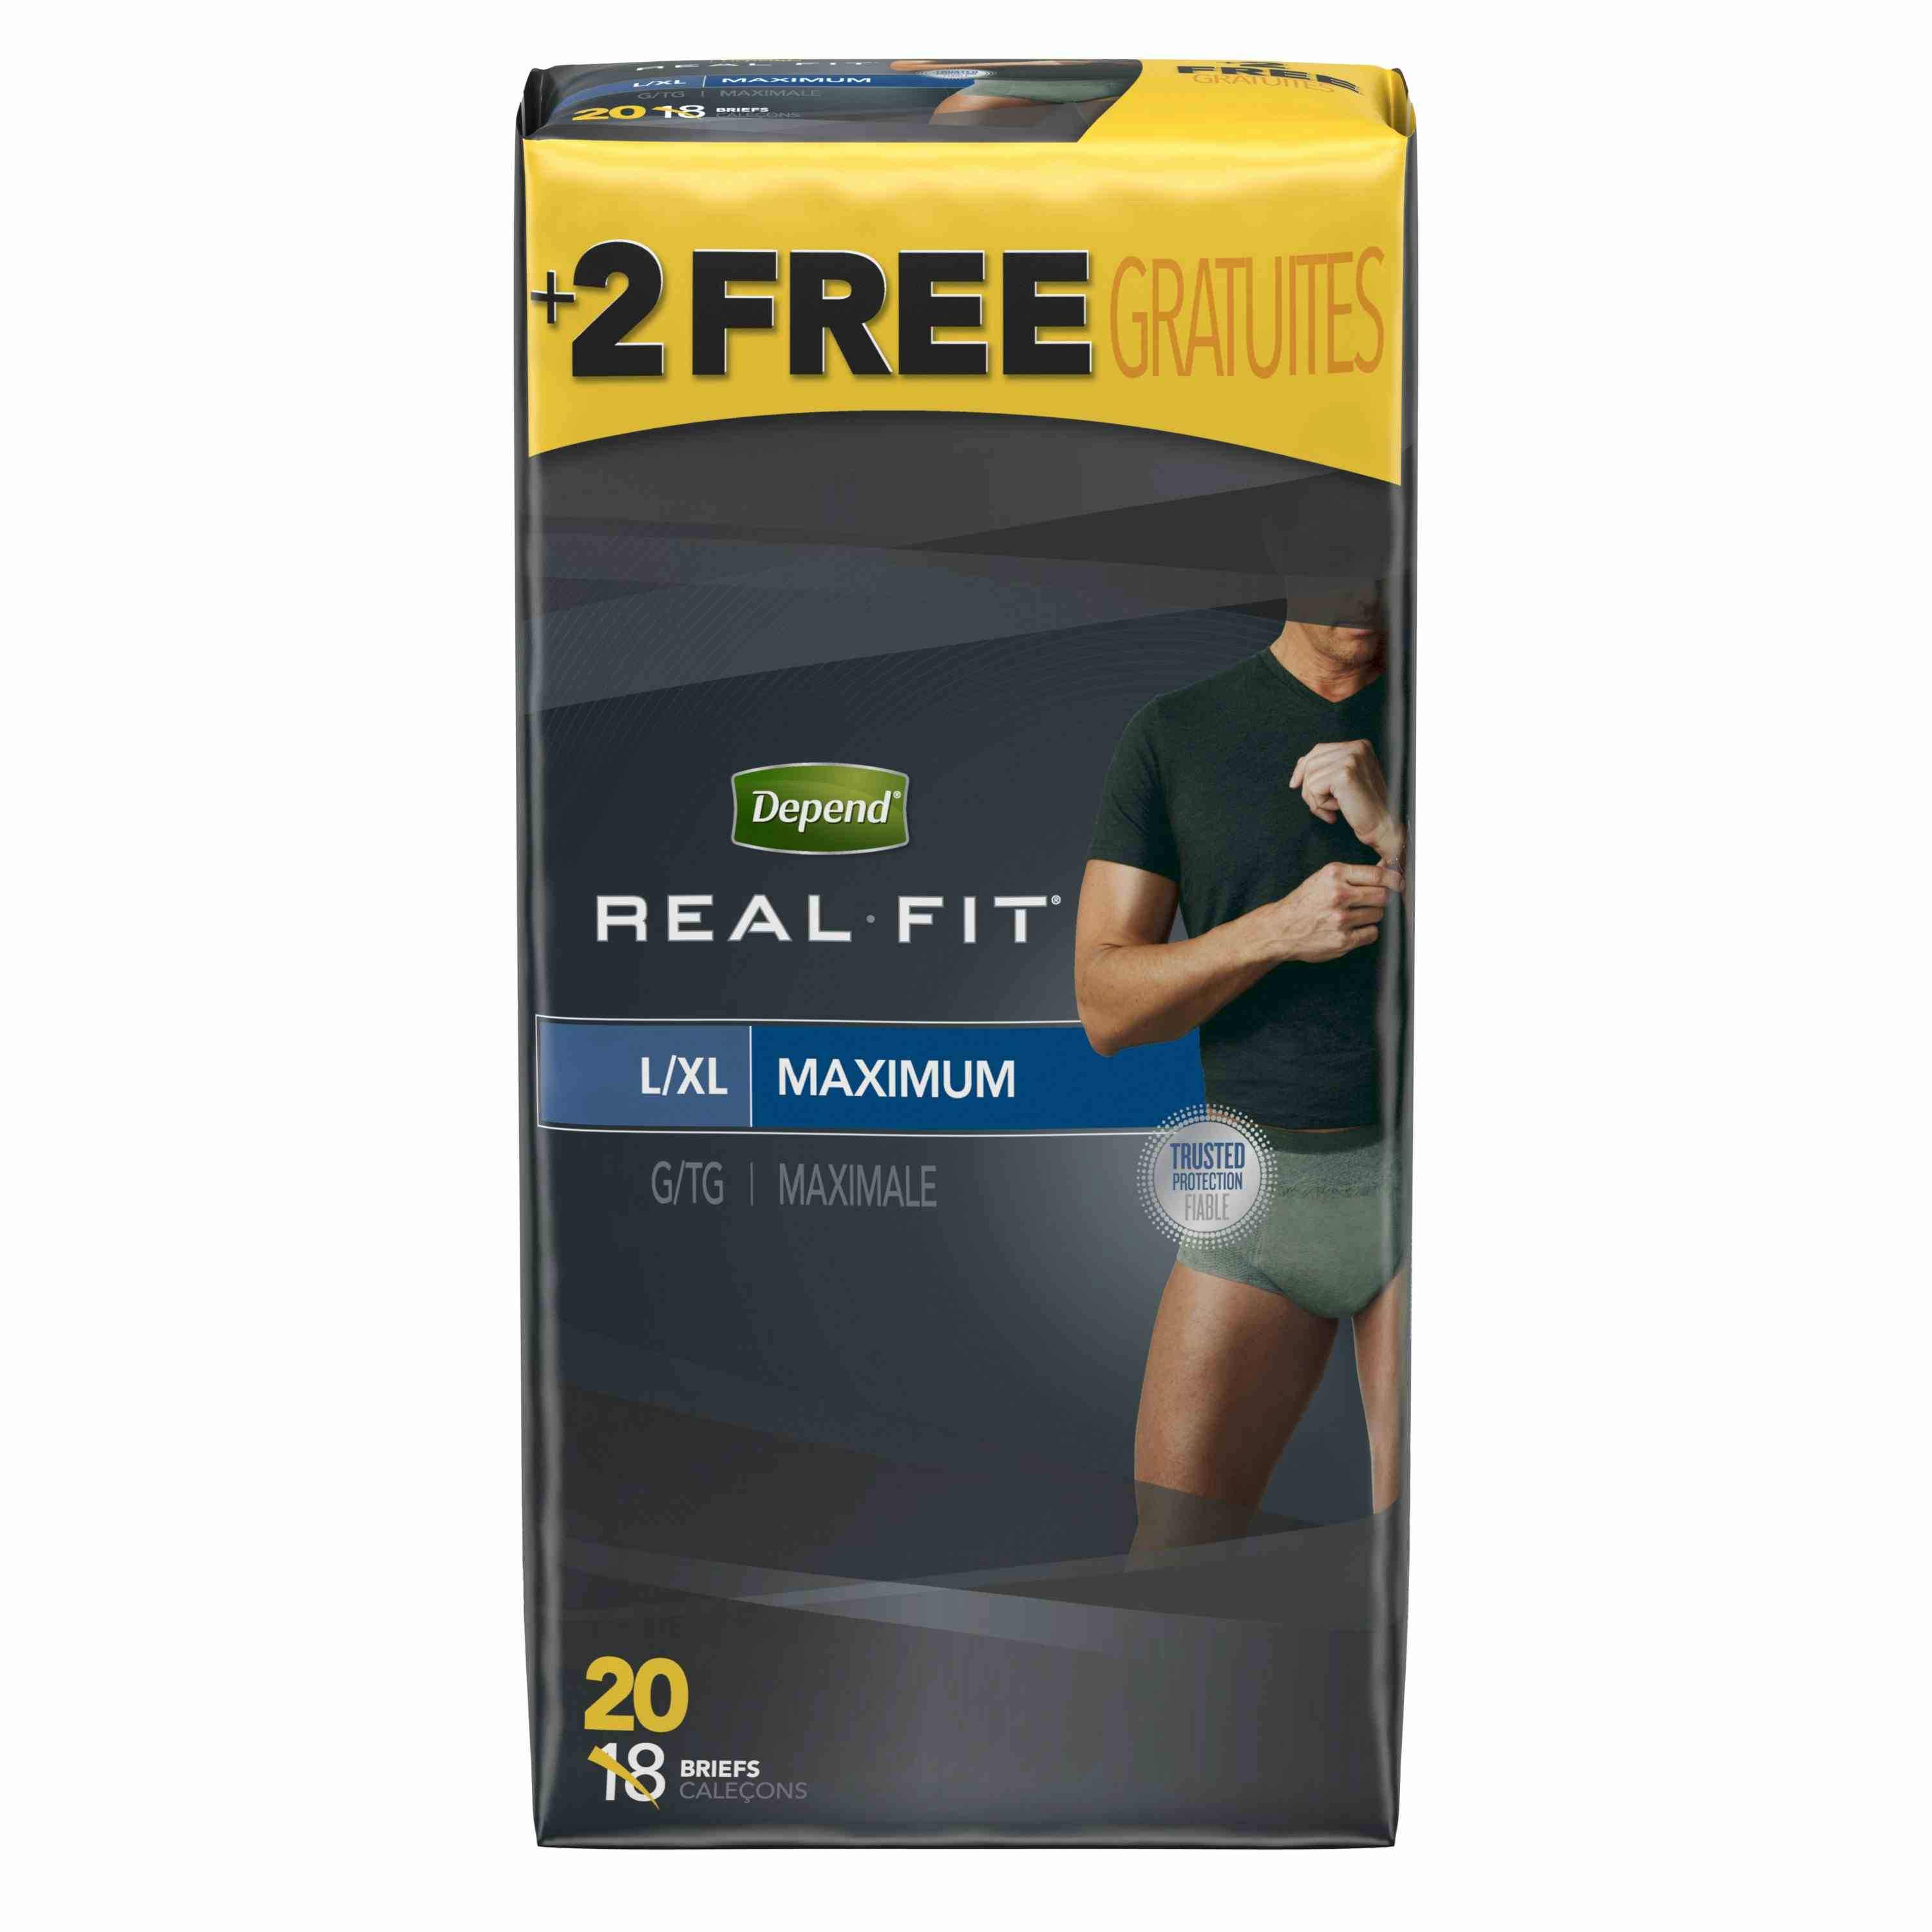 Depend Real Fit Disposable Male Adult Pull On Underwear with Tear Away Seams, Heavy Absorbency